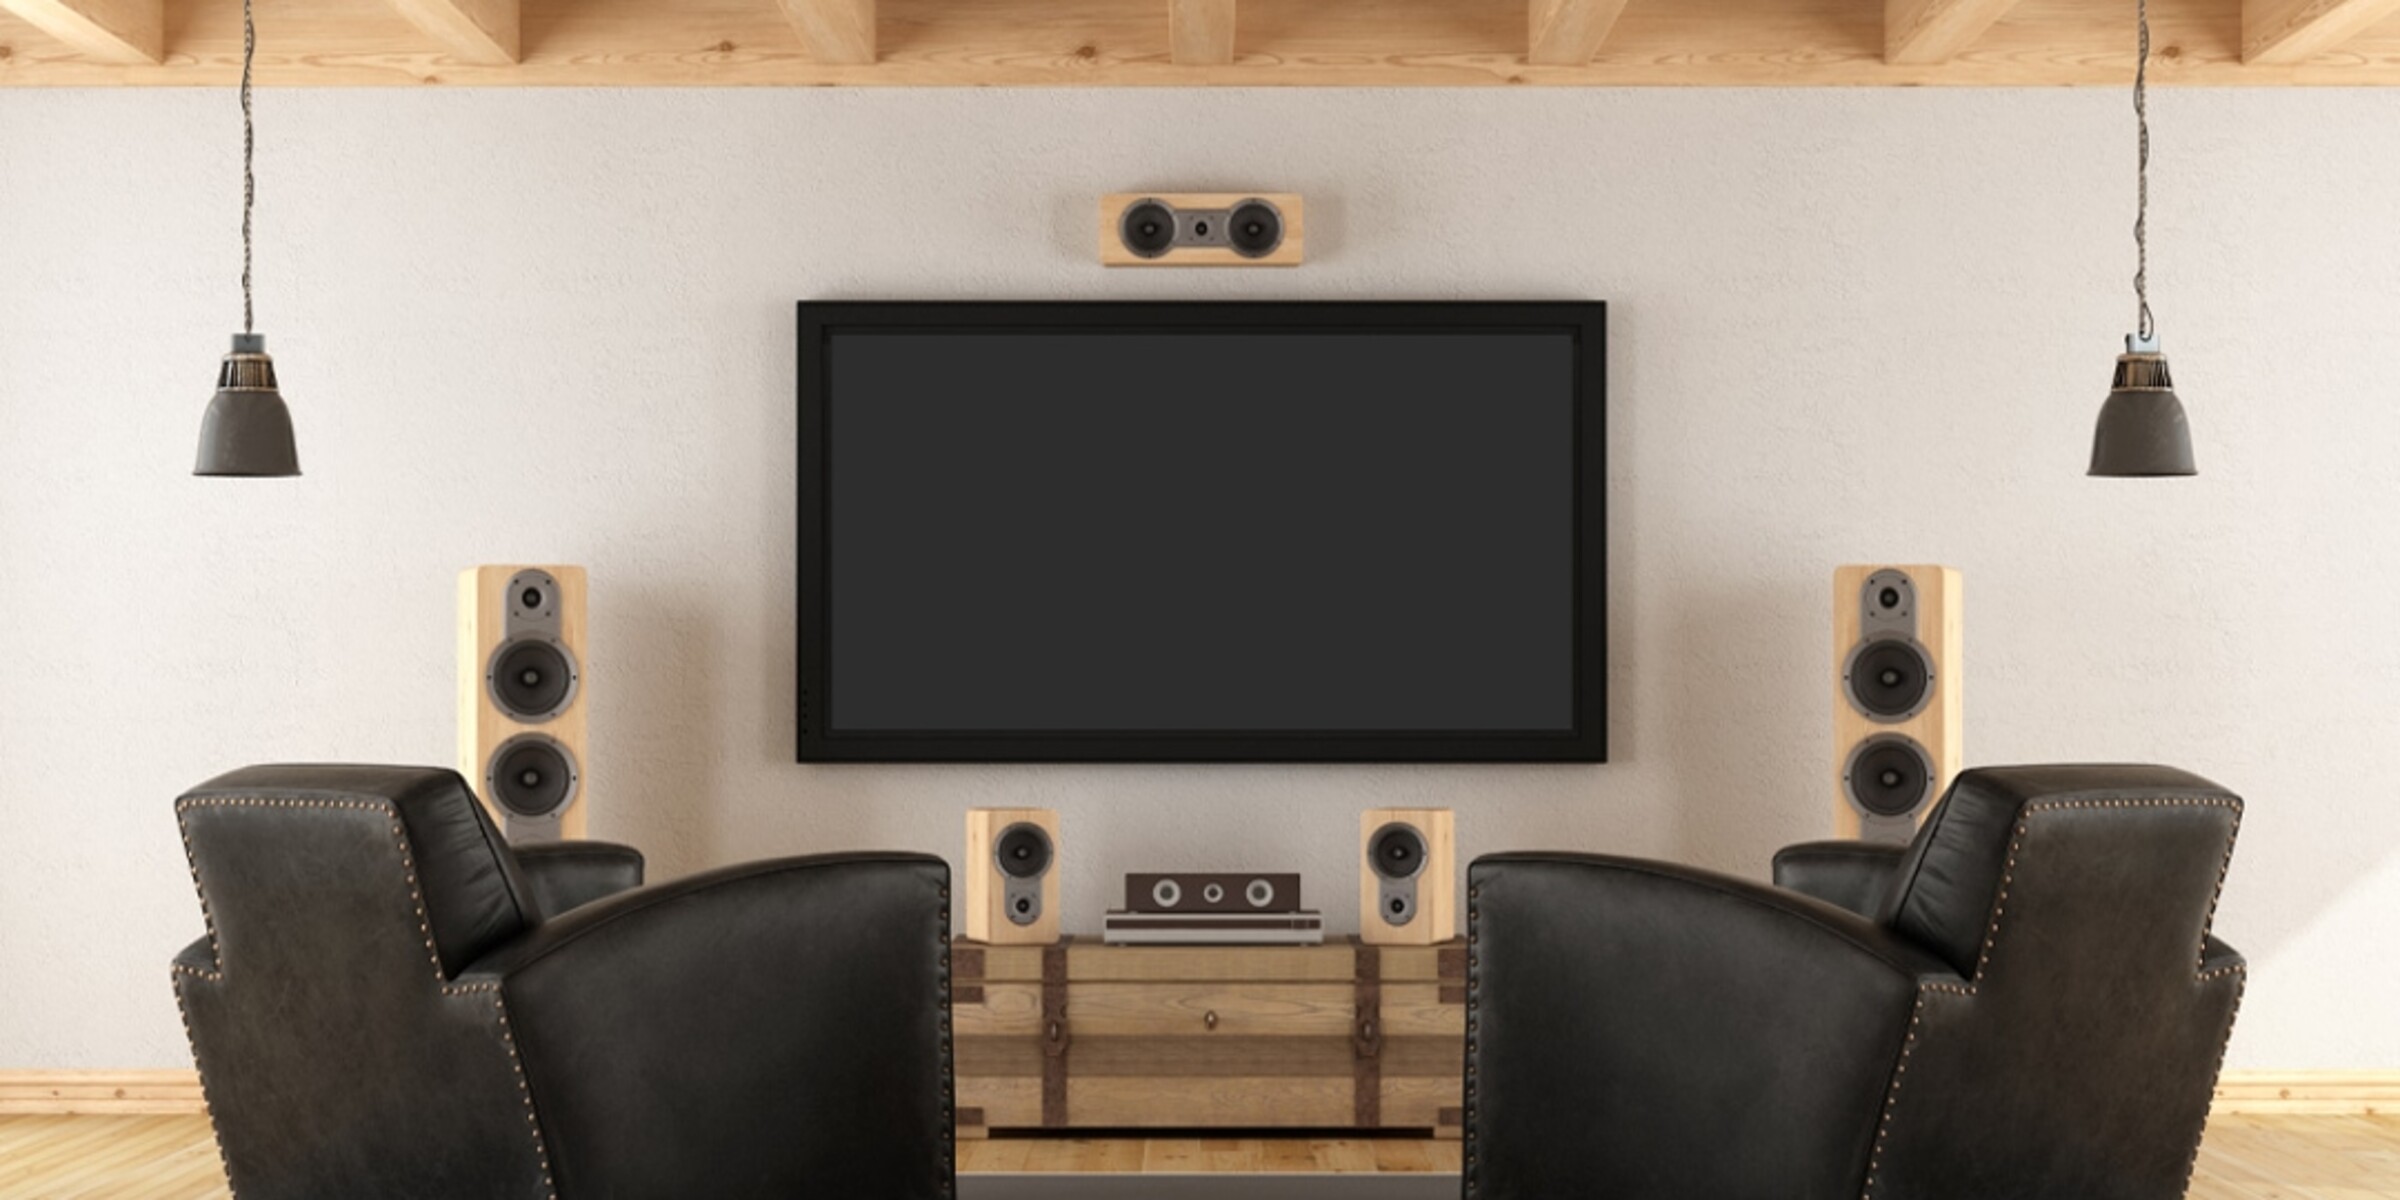 how-to-install-surround-sound-system-if-you-already-have-walls-installed